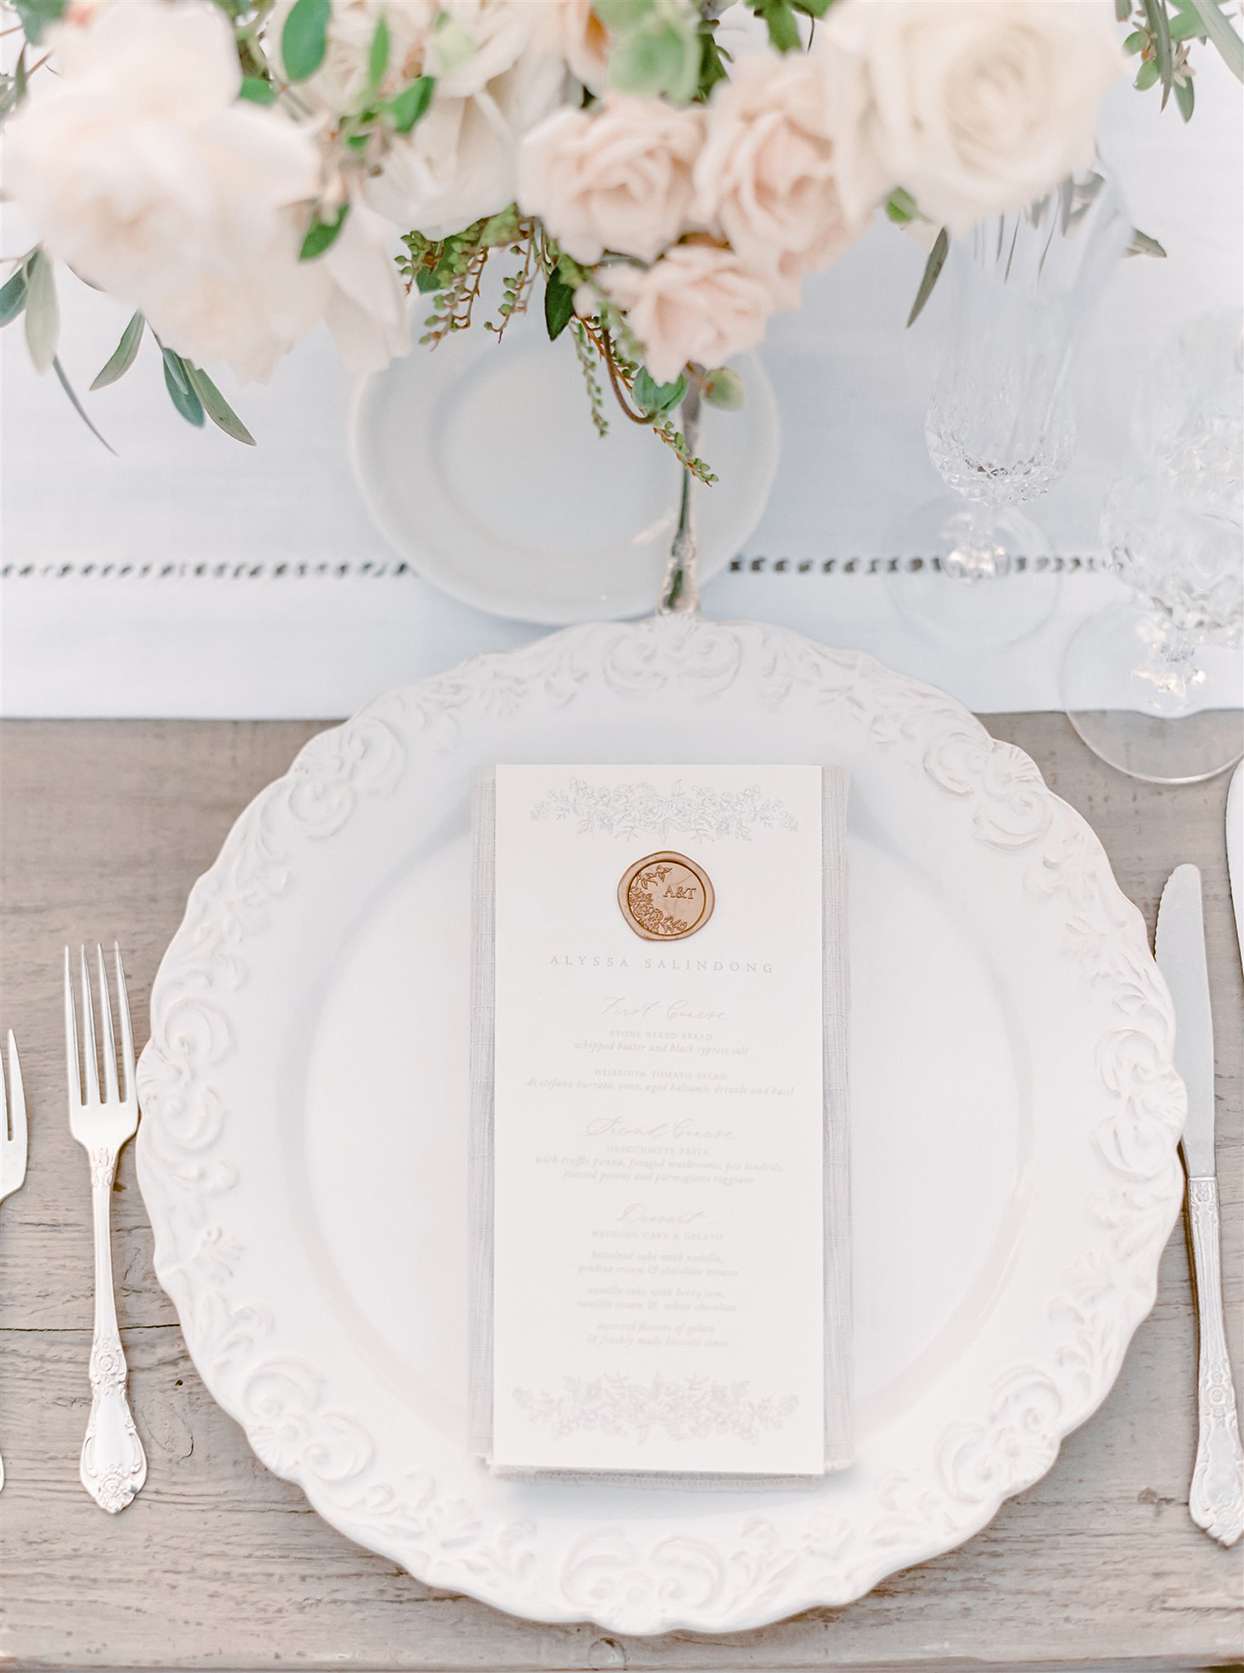 Place setting with white ceramic chargers with a vintage-inspired textured border, silver flatware, and crystal stemware